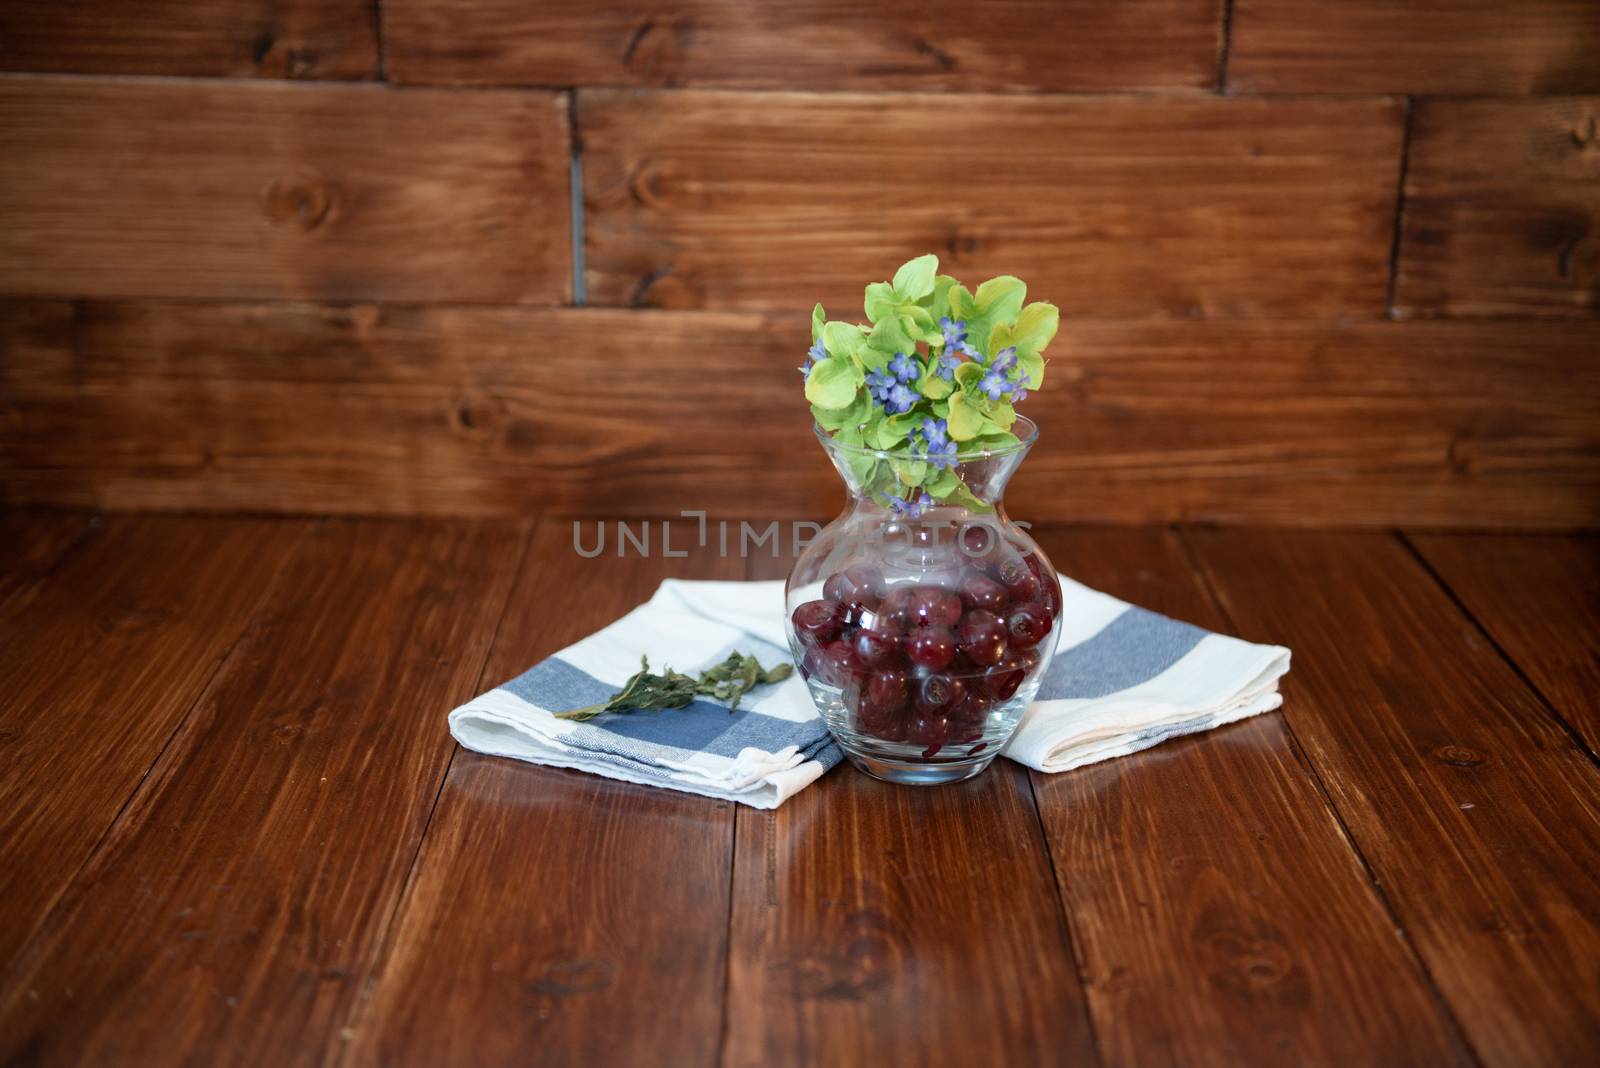 cherry in a vase on wooden background with towel